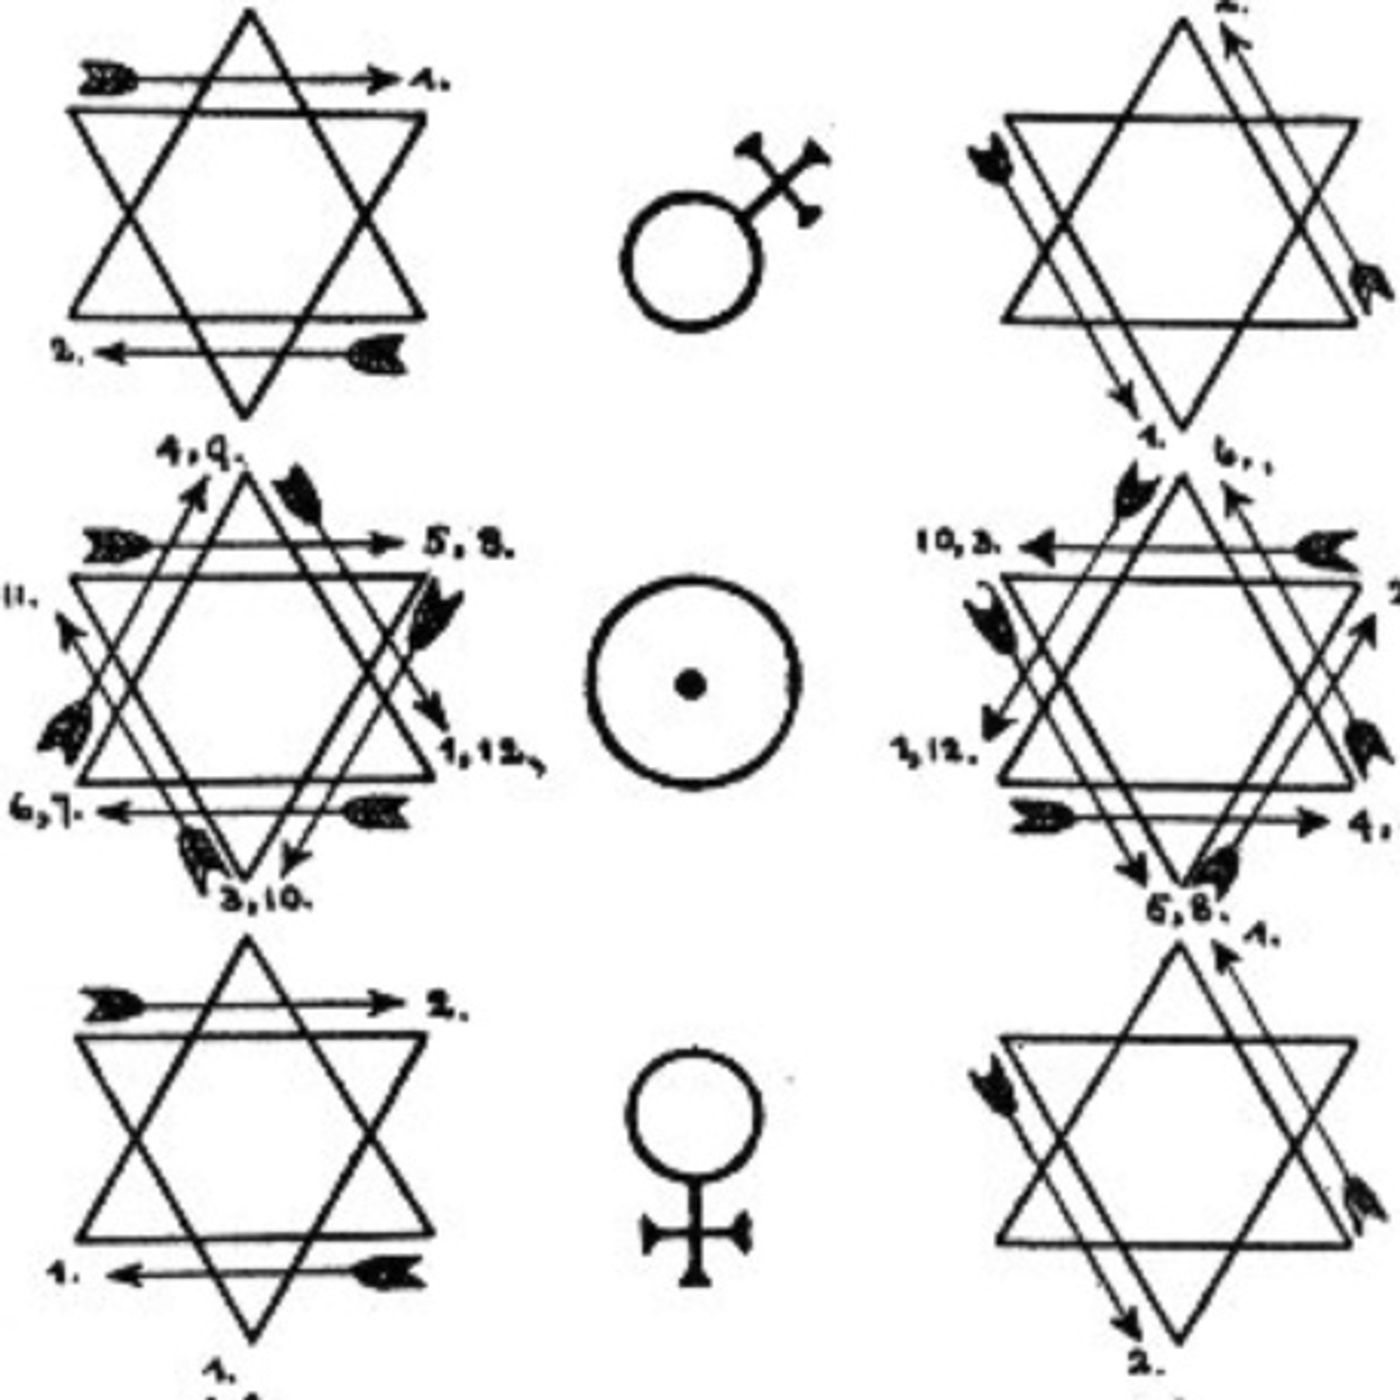 The Ritual of the Hexagram- Swastikas and the 